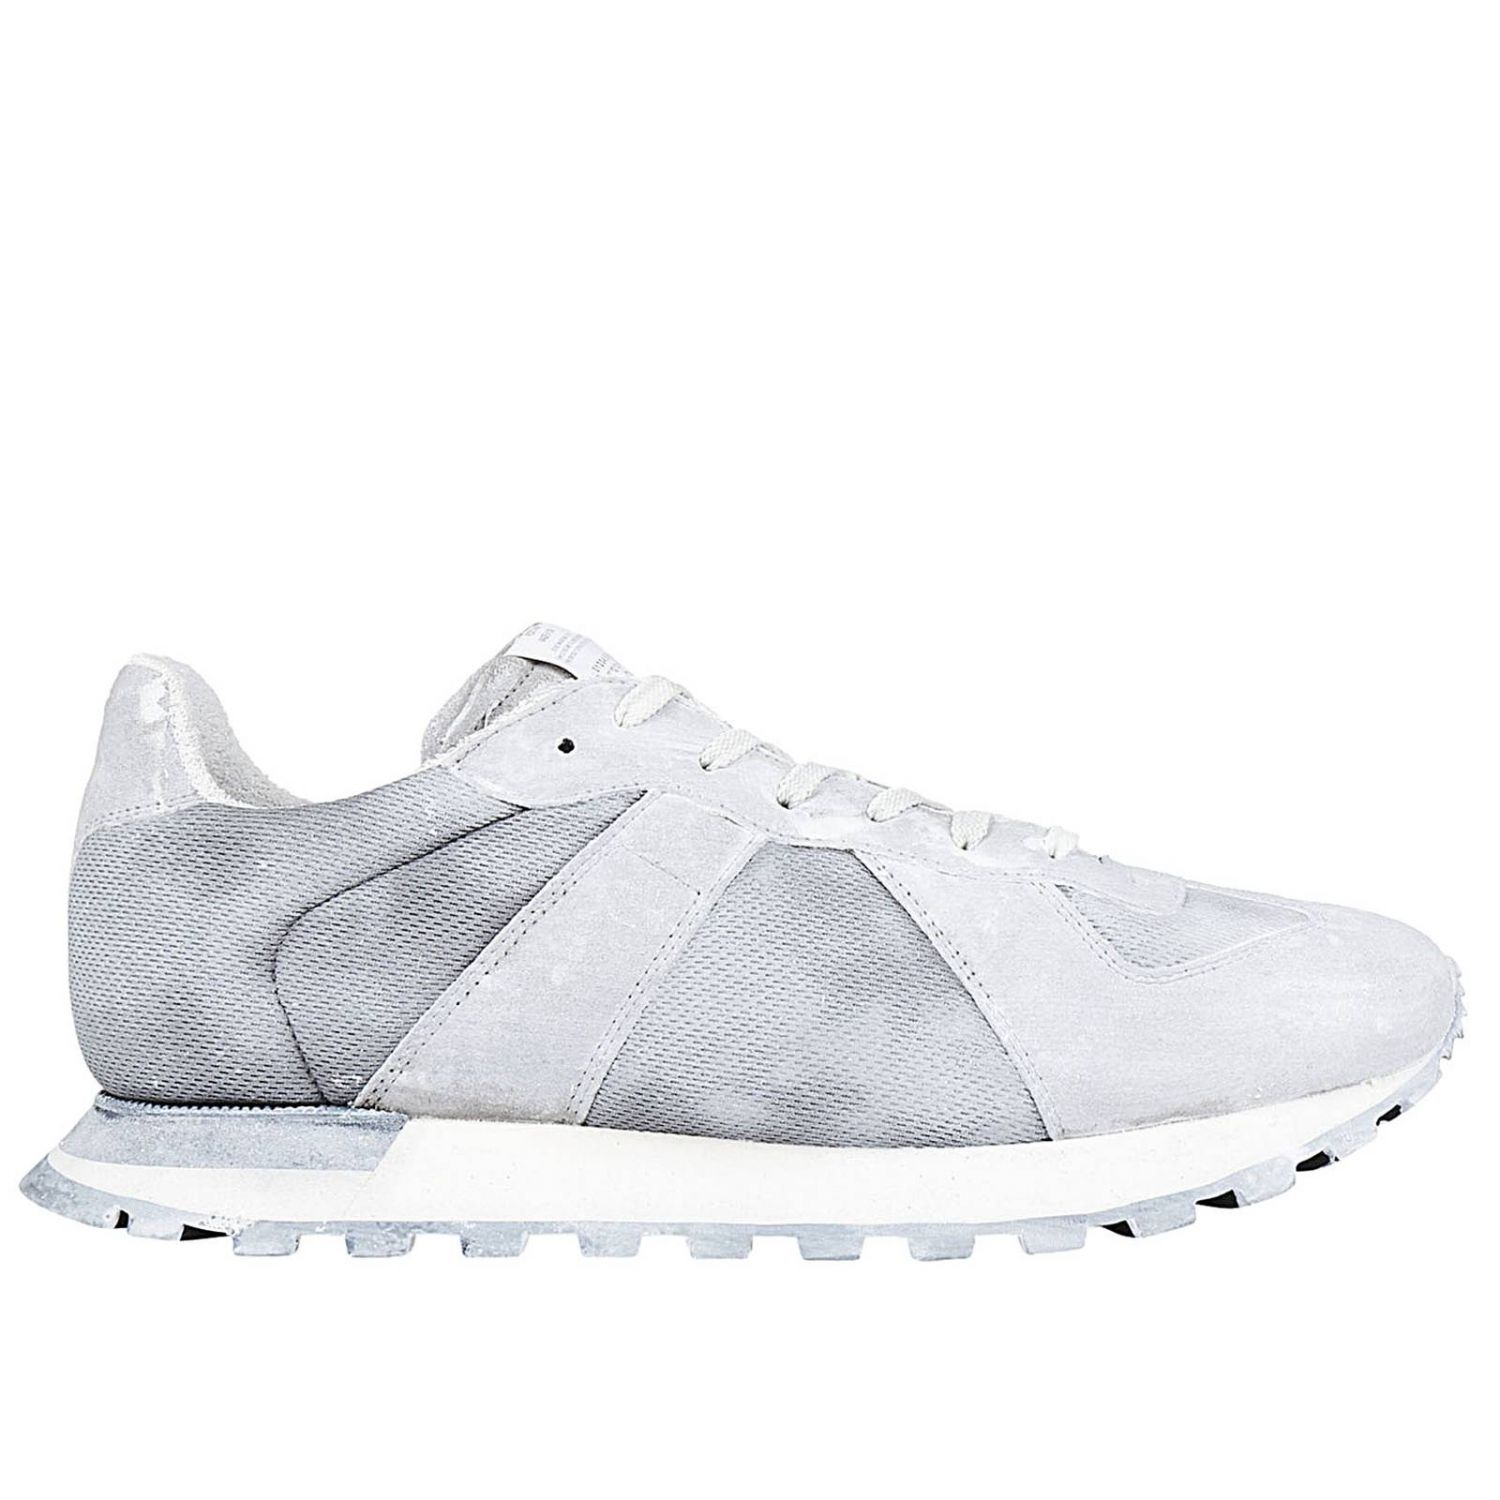 Maison Margiela Outlet: men's sneakers Replica in mesh with used effect